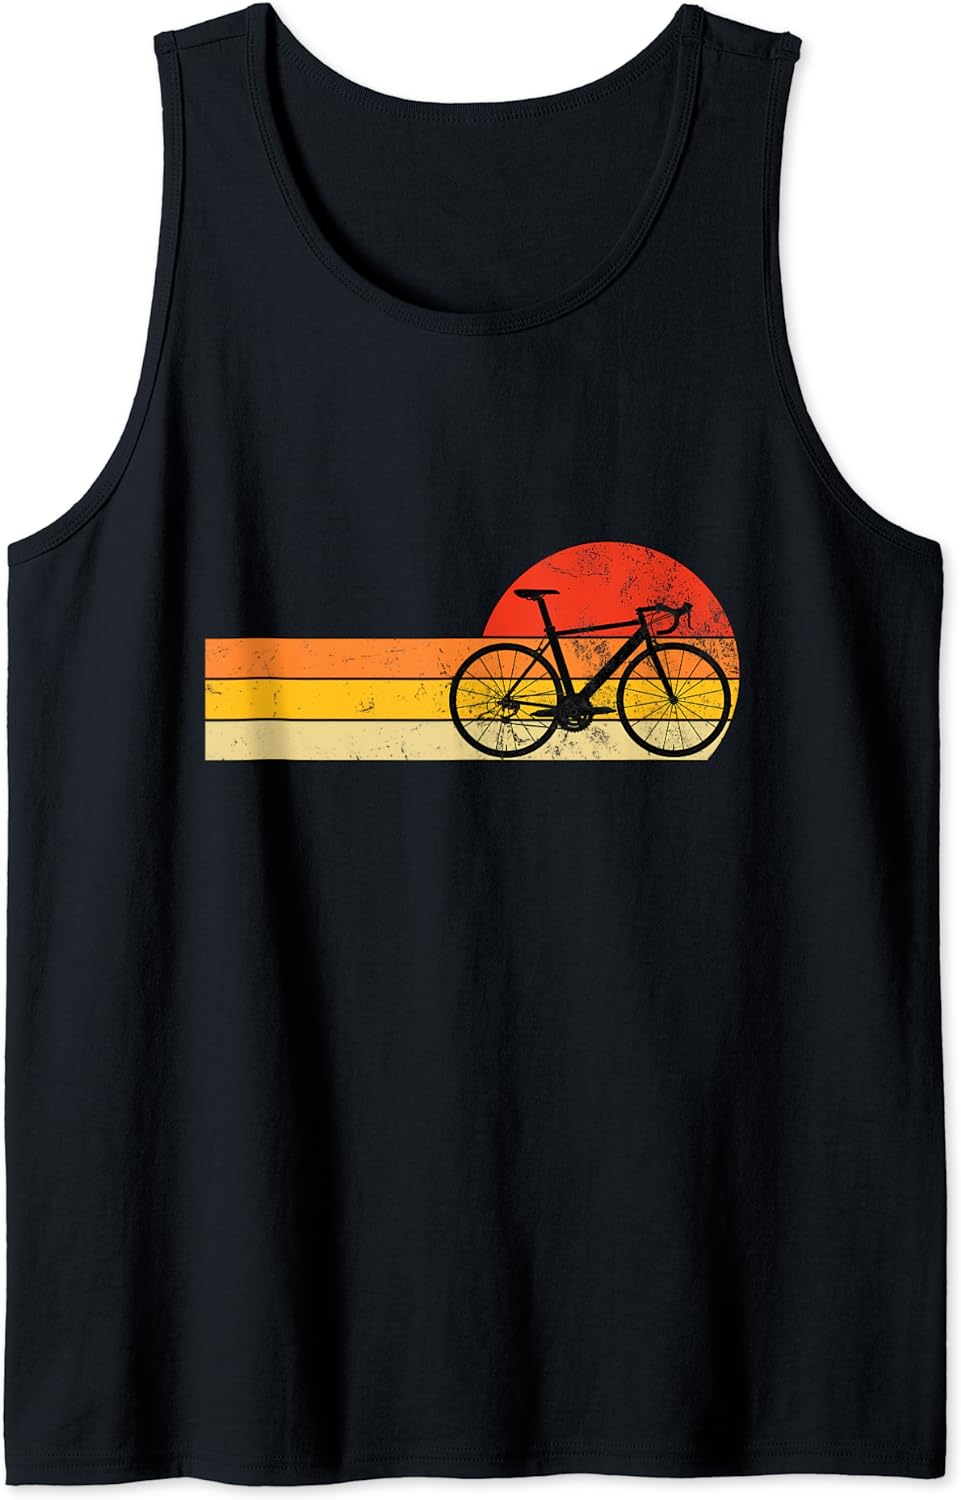 Cycling Retro Style For Cyclists Vintage Bike Cycling Lover Tank Top Best Price